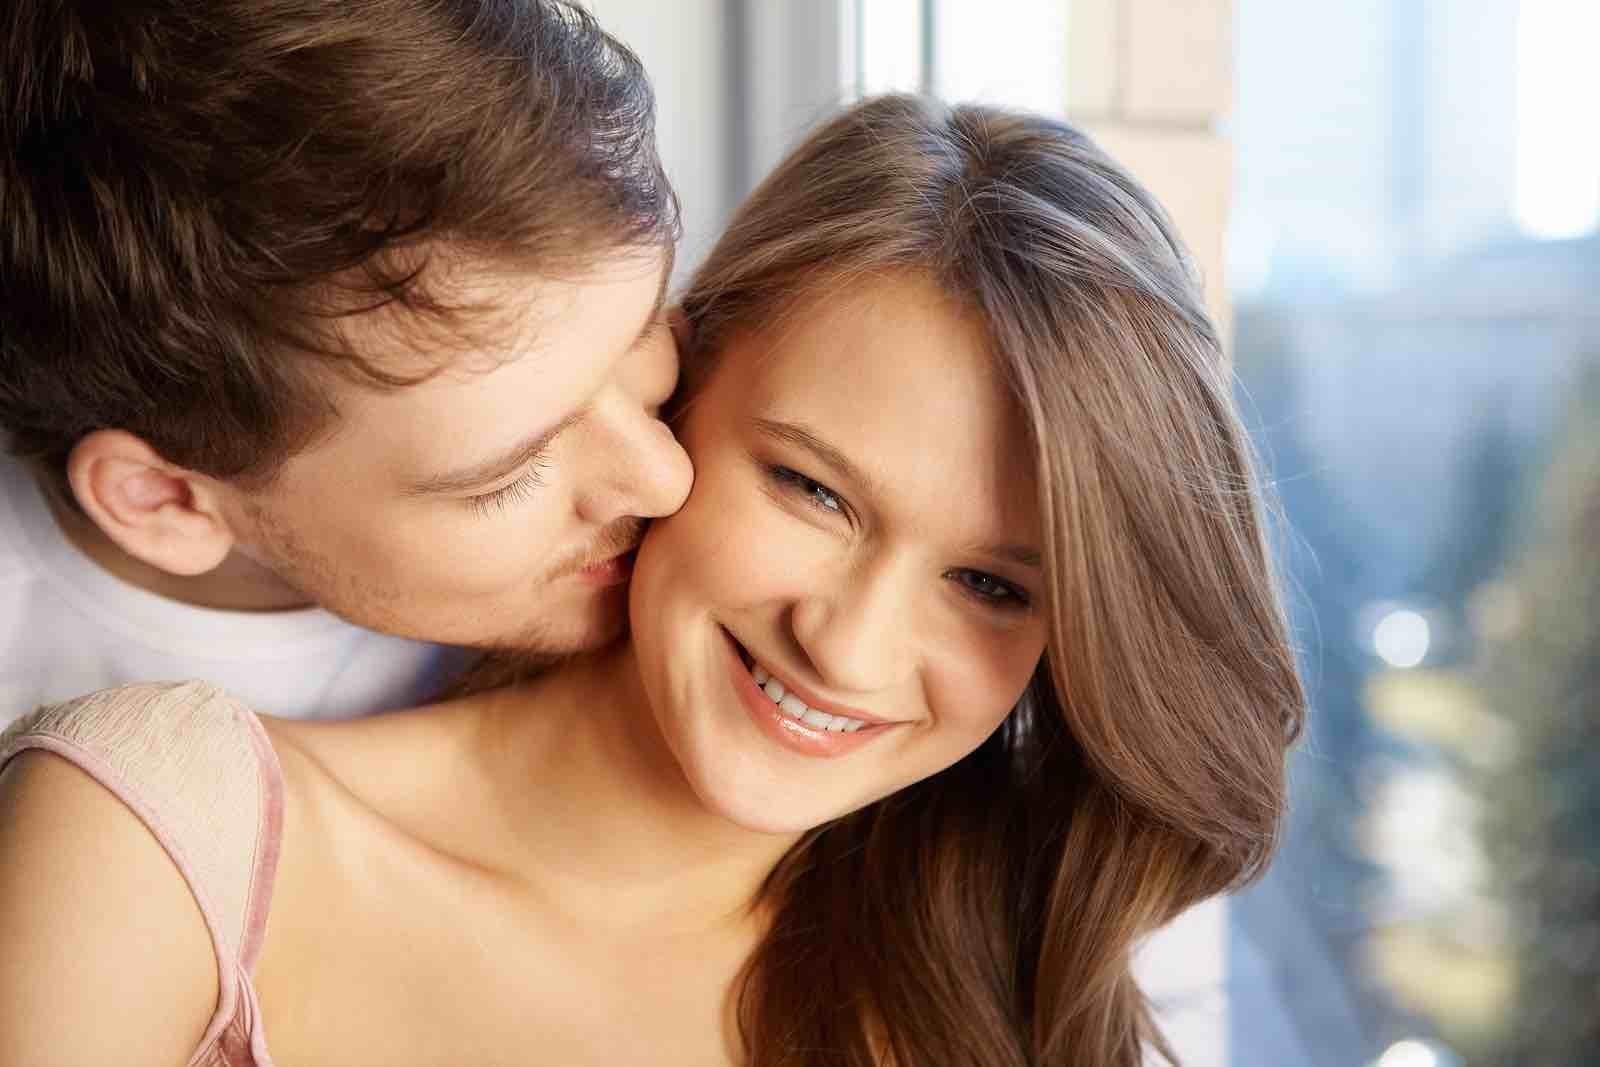 Dating site for singles with herpes